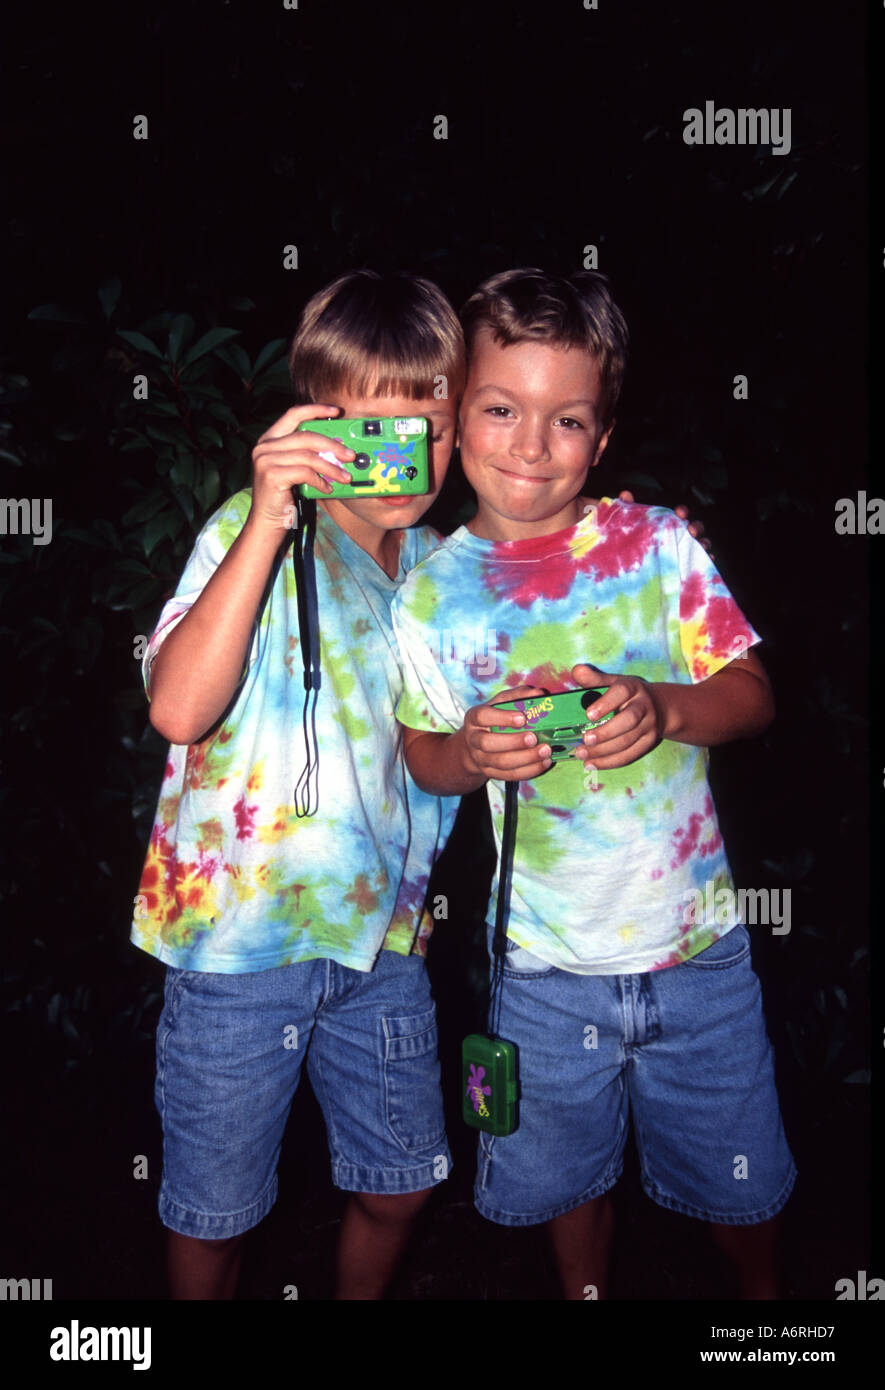 Two young boys taking pictures Stock Photo